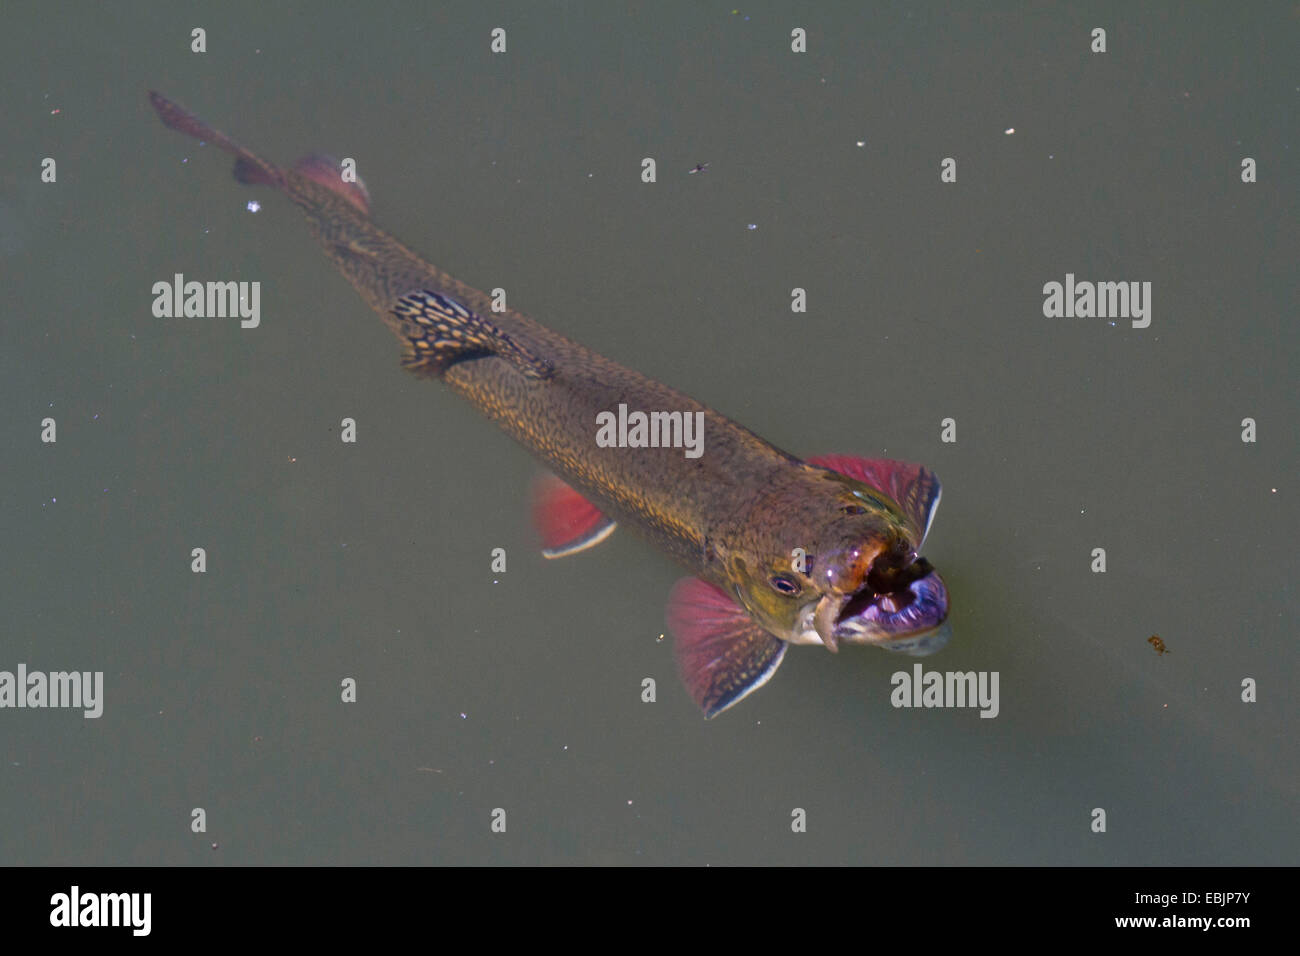 brook trout, brook char, brook charr (Salvelinus fontinalis), eating insect at water surface Stock Photo